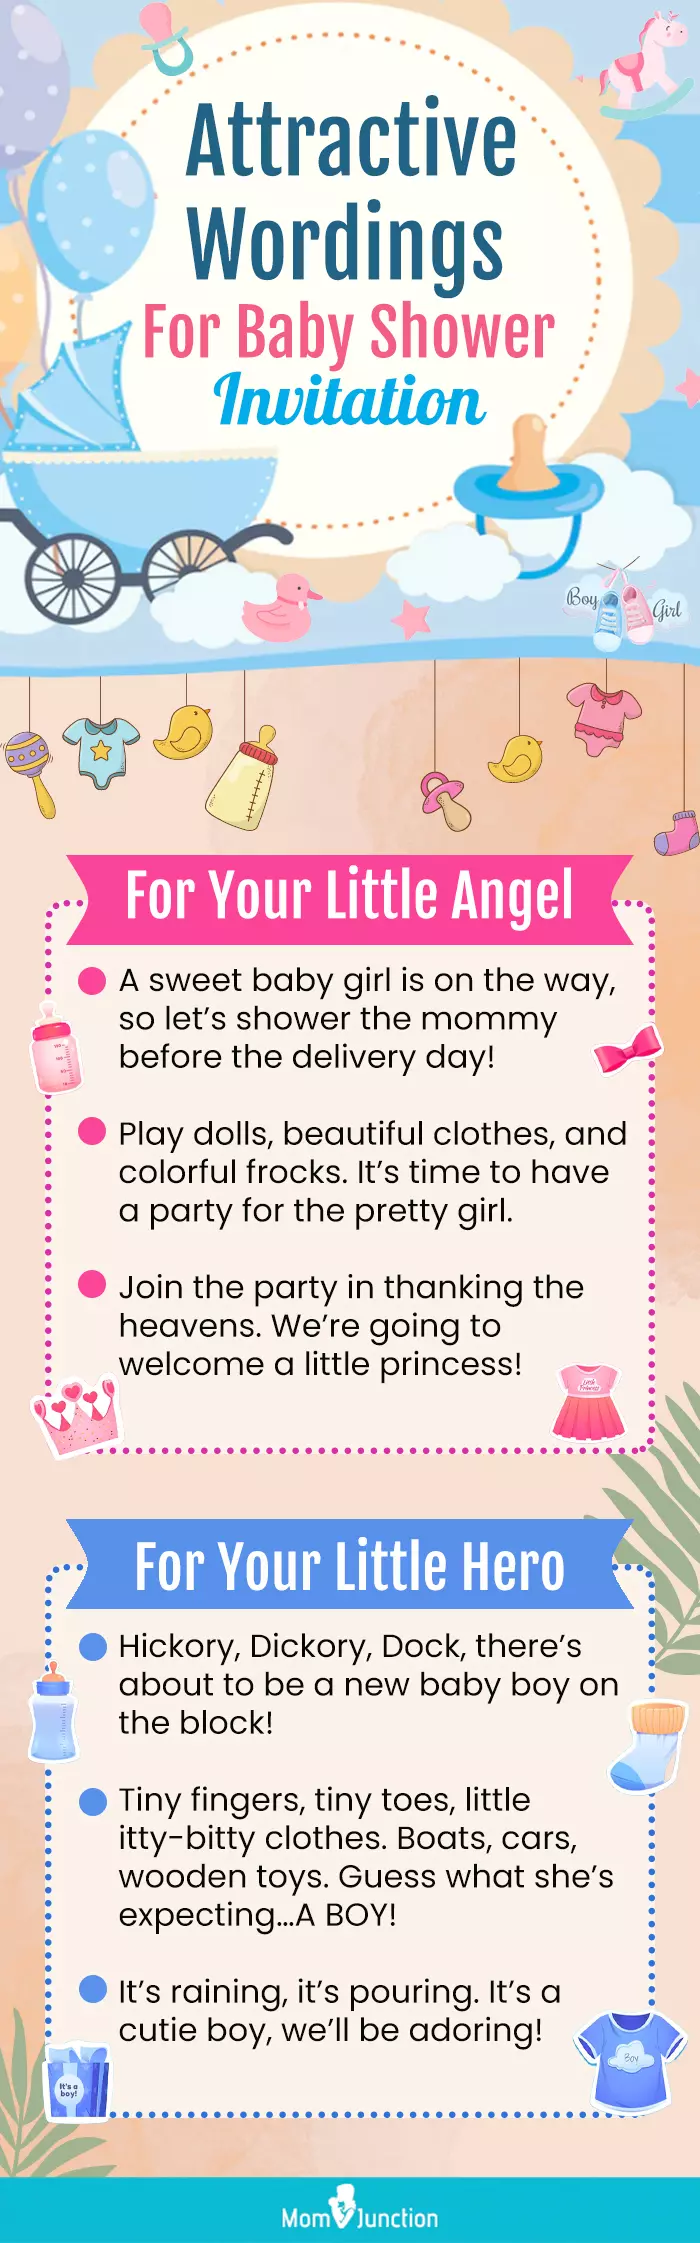 attractive wordings for baby shower invitation (infographic)